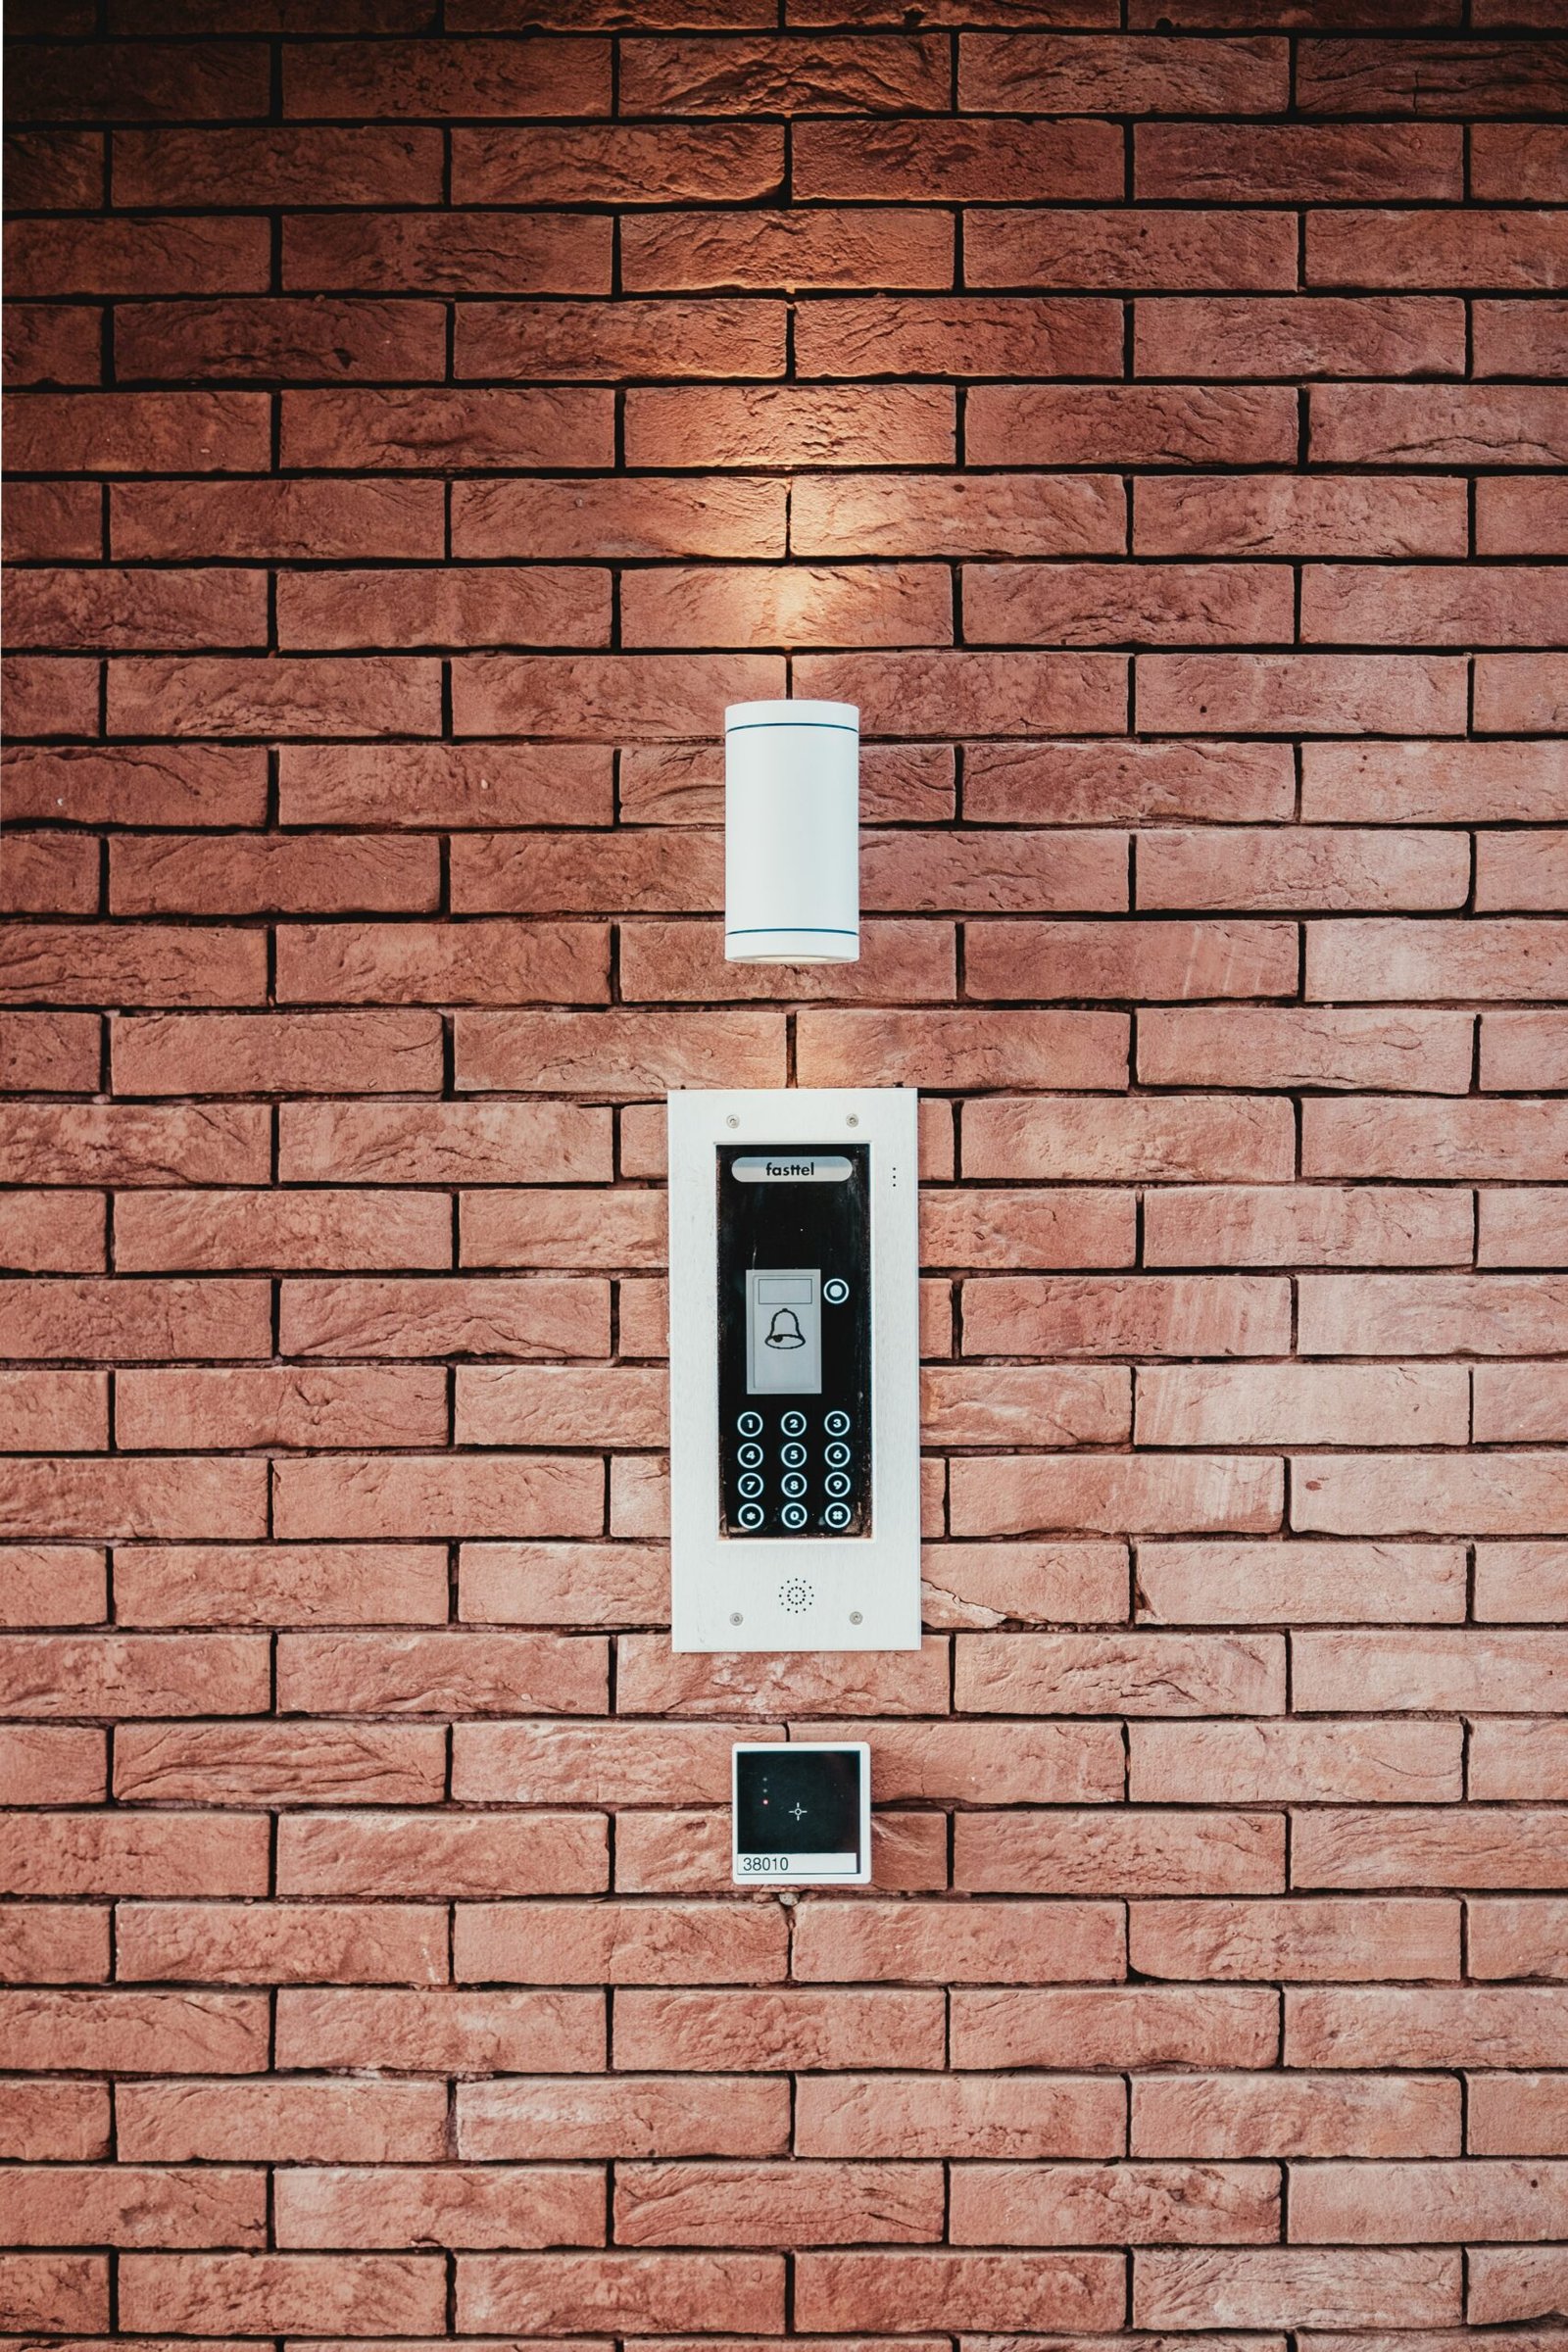 Factors to Consider when Choosing an Alarm System for Your Home or Business